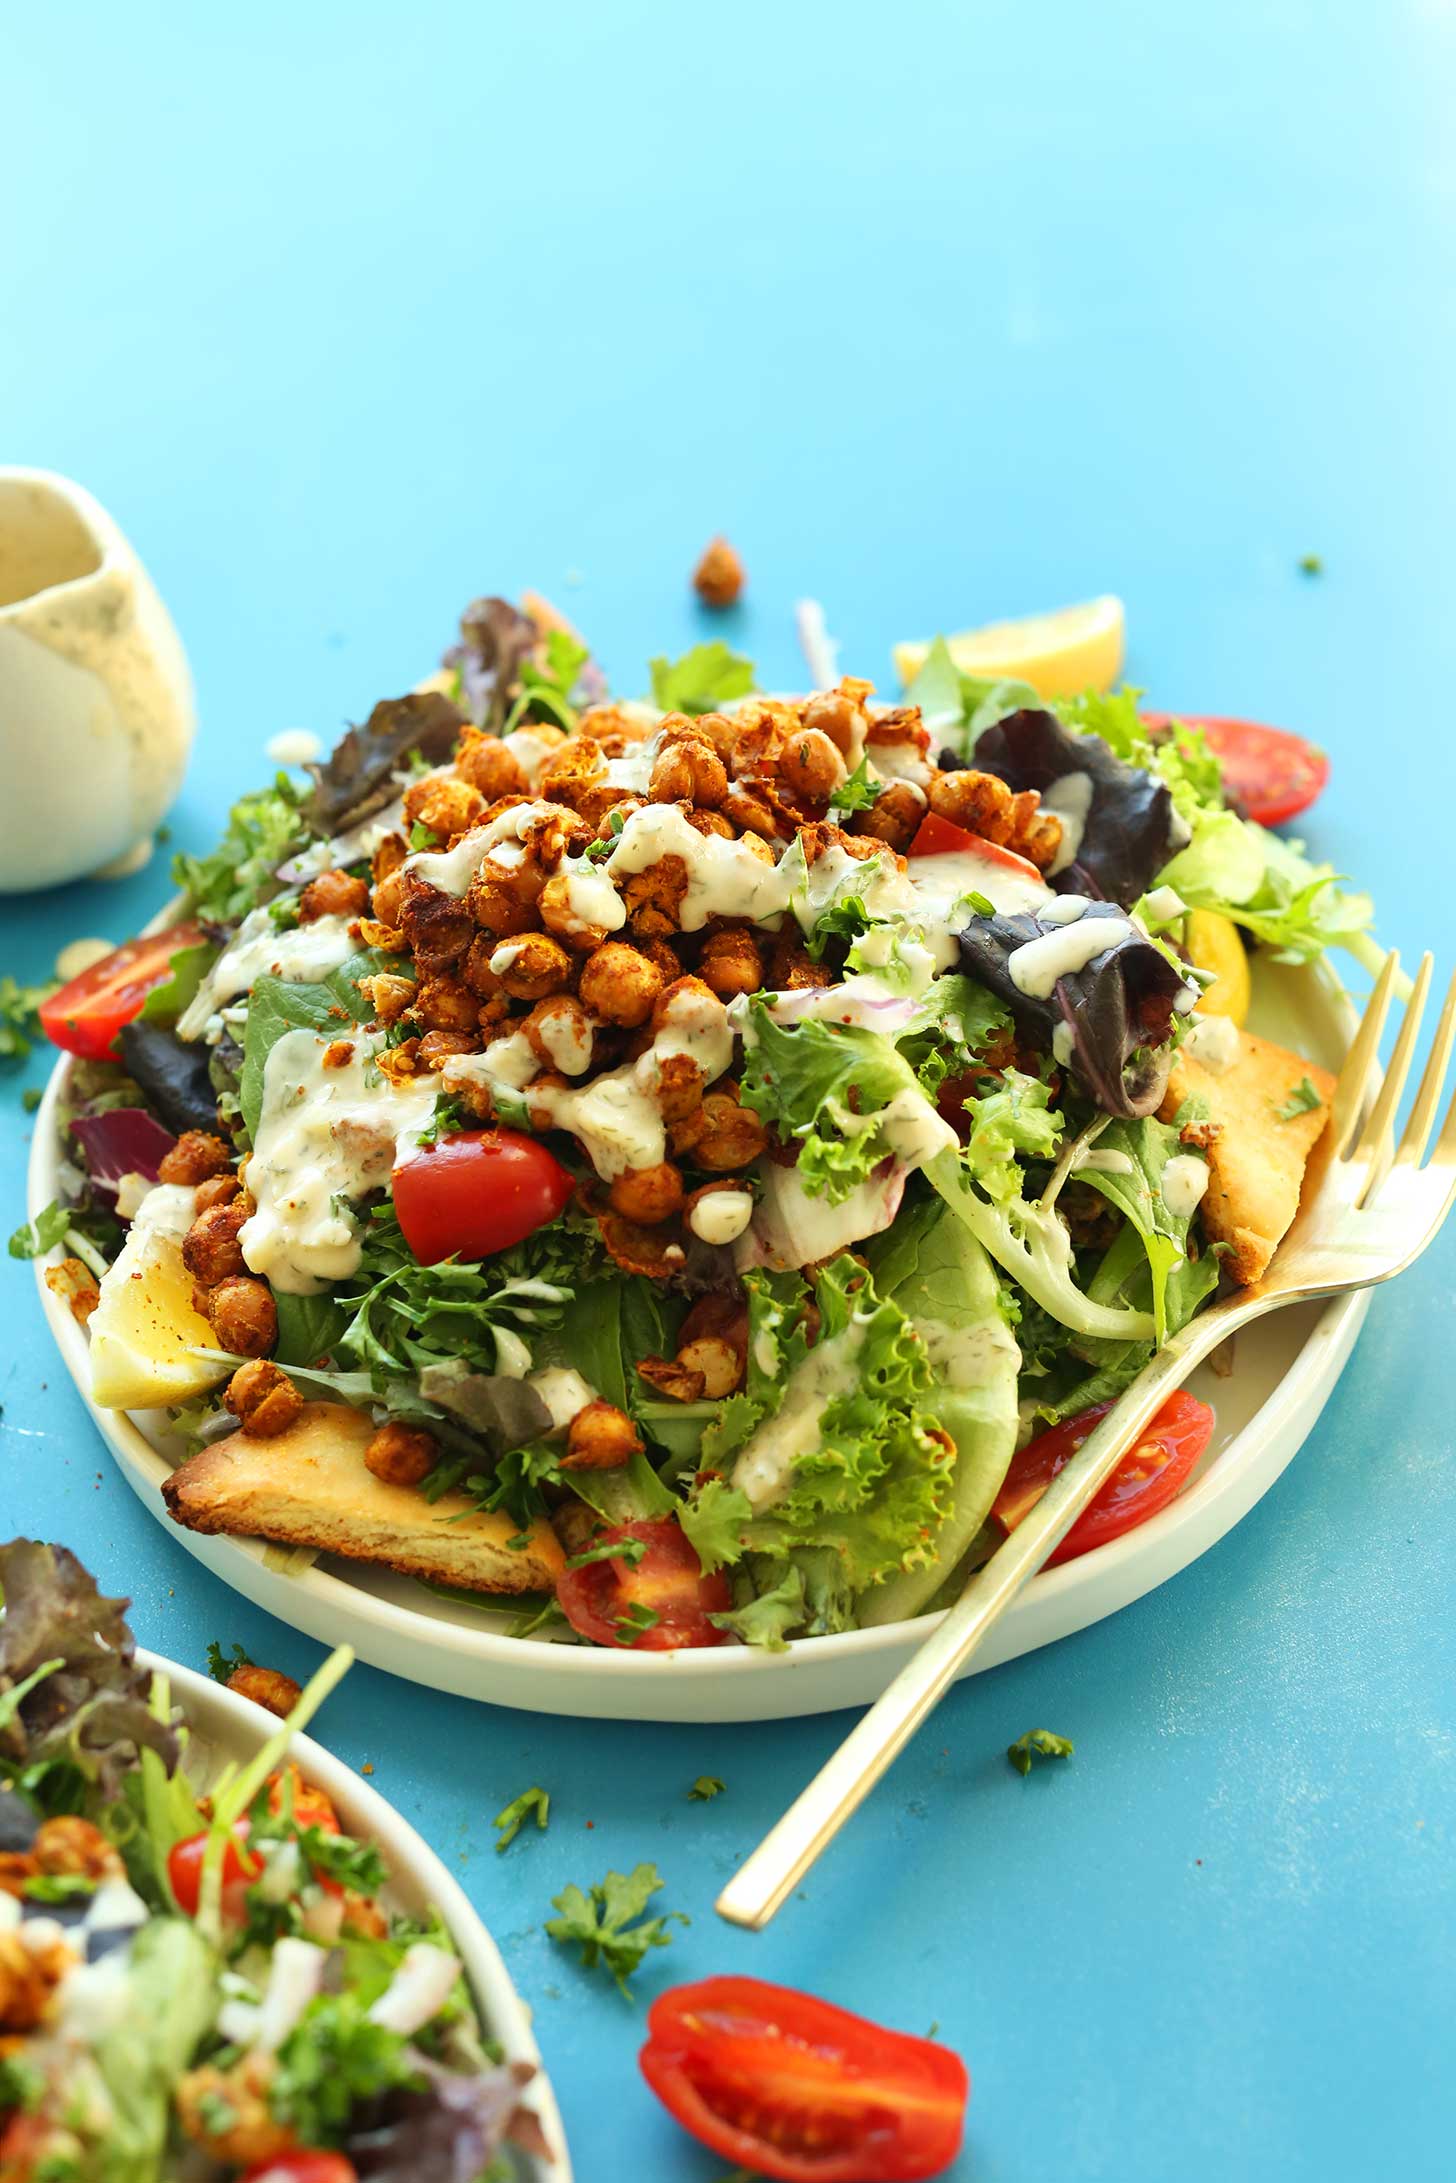 Plate filled with a large serving of our Chickpea Shawarma Salad for a gluten-free vegan meal